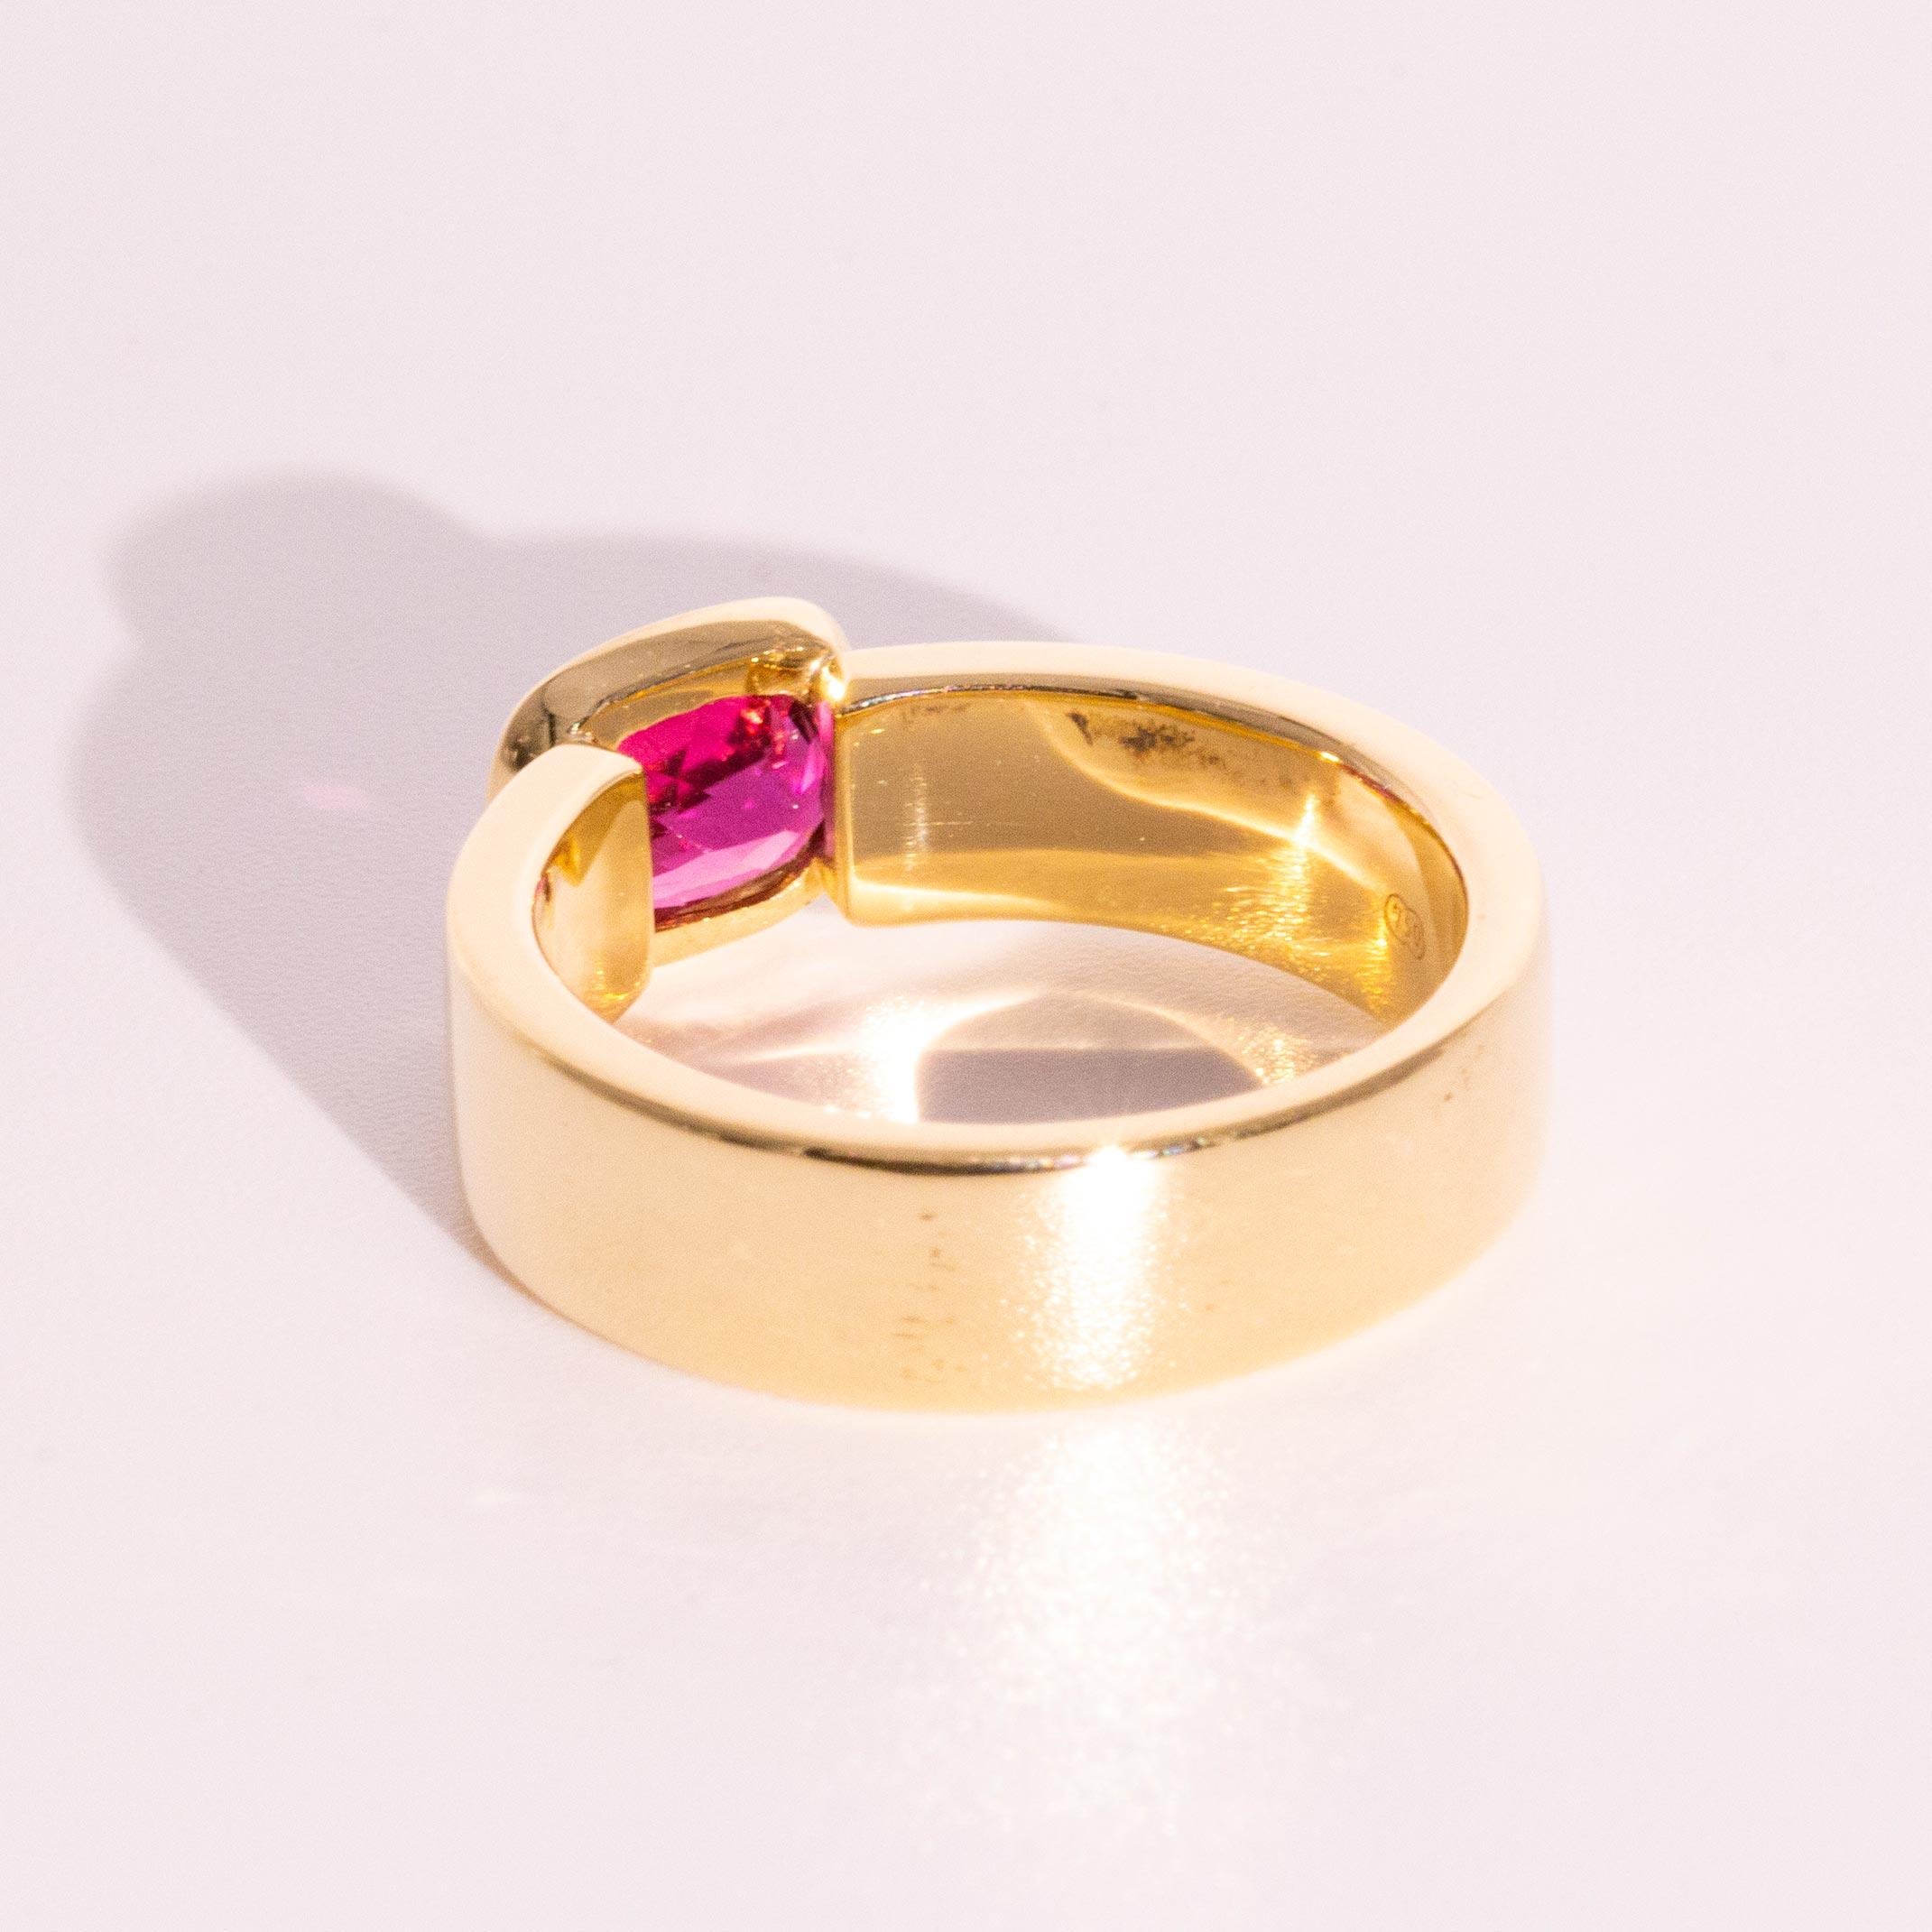 This contemporary 1.21 Carat Cushion Cut Pink Tourmaline 18 Carat Yellow Gold Cocktail Ring features an east west bezel set tourmaline of beautiful colour. A unisex design with a timeless appeal, this ring really makes the most of the gemstone